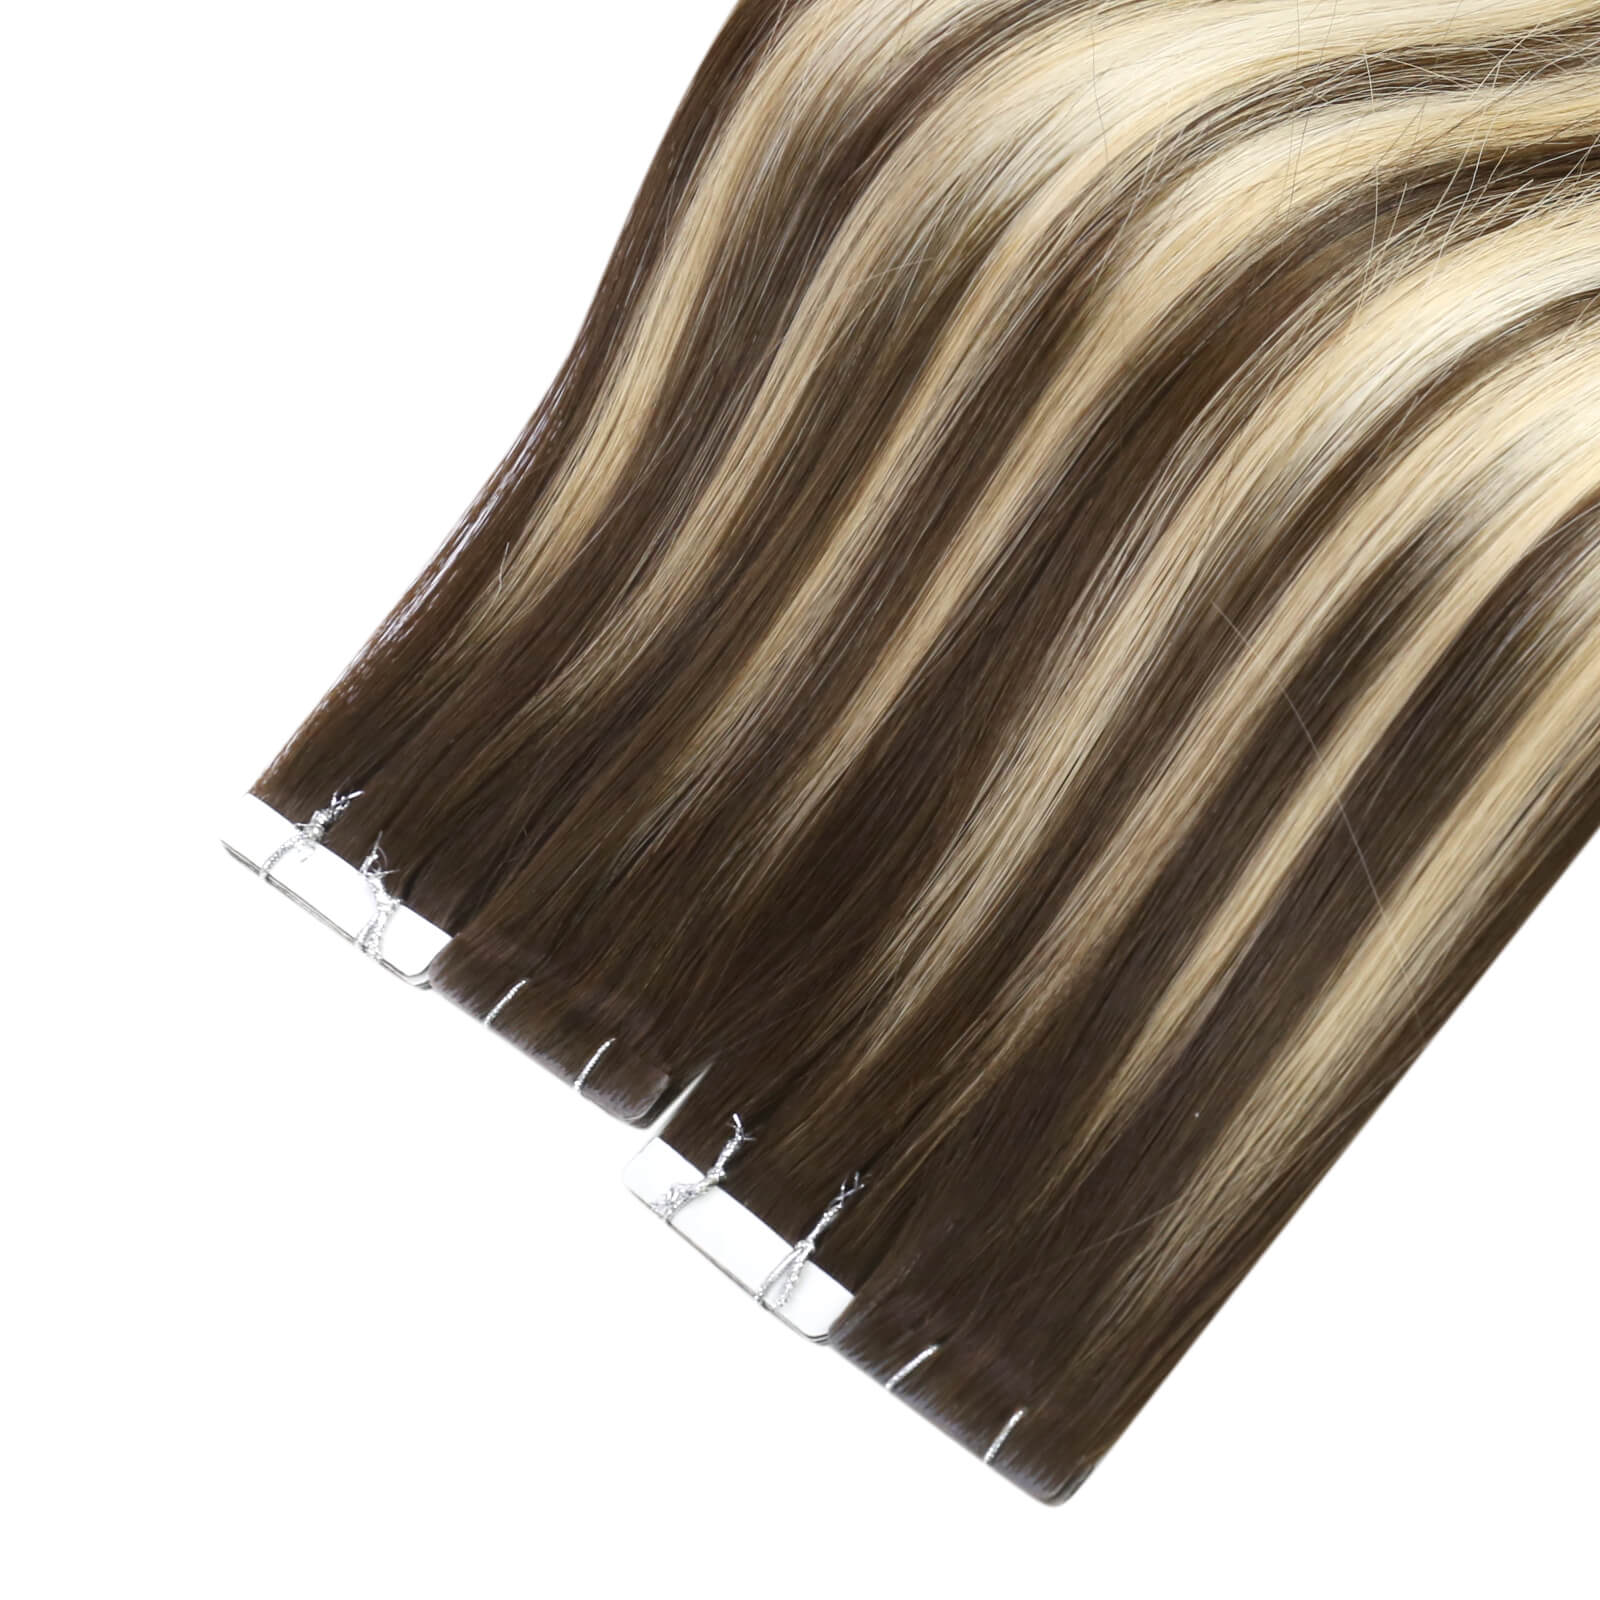 sunny hair, lasting one year hair, invisible seamless virgin hair, injection tape in hair, high quality human hair, hair tape extensions, balayage hair extensions, blonde and brown hair, injection tape hair